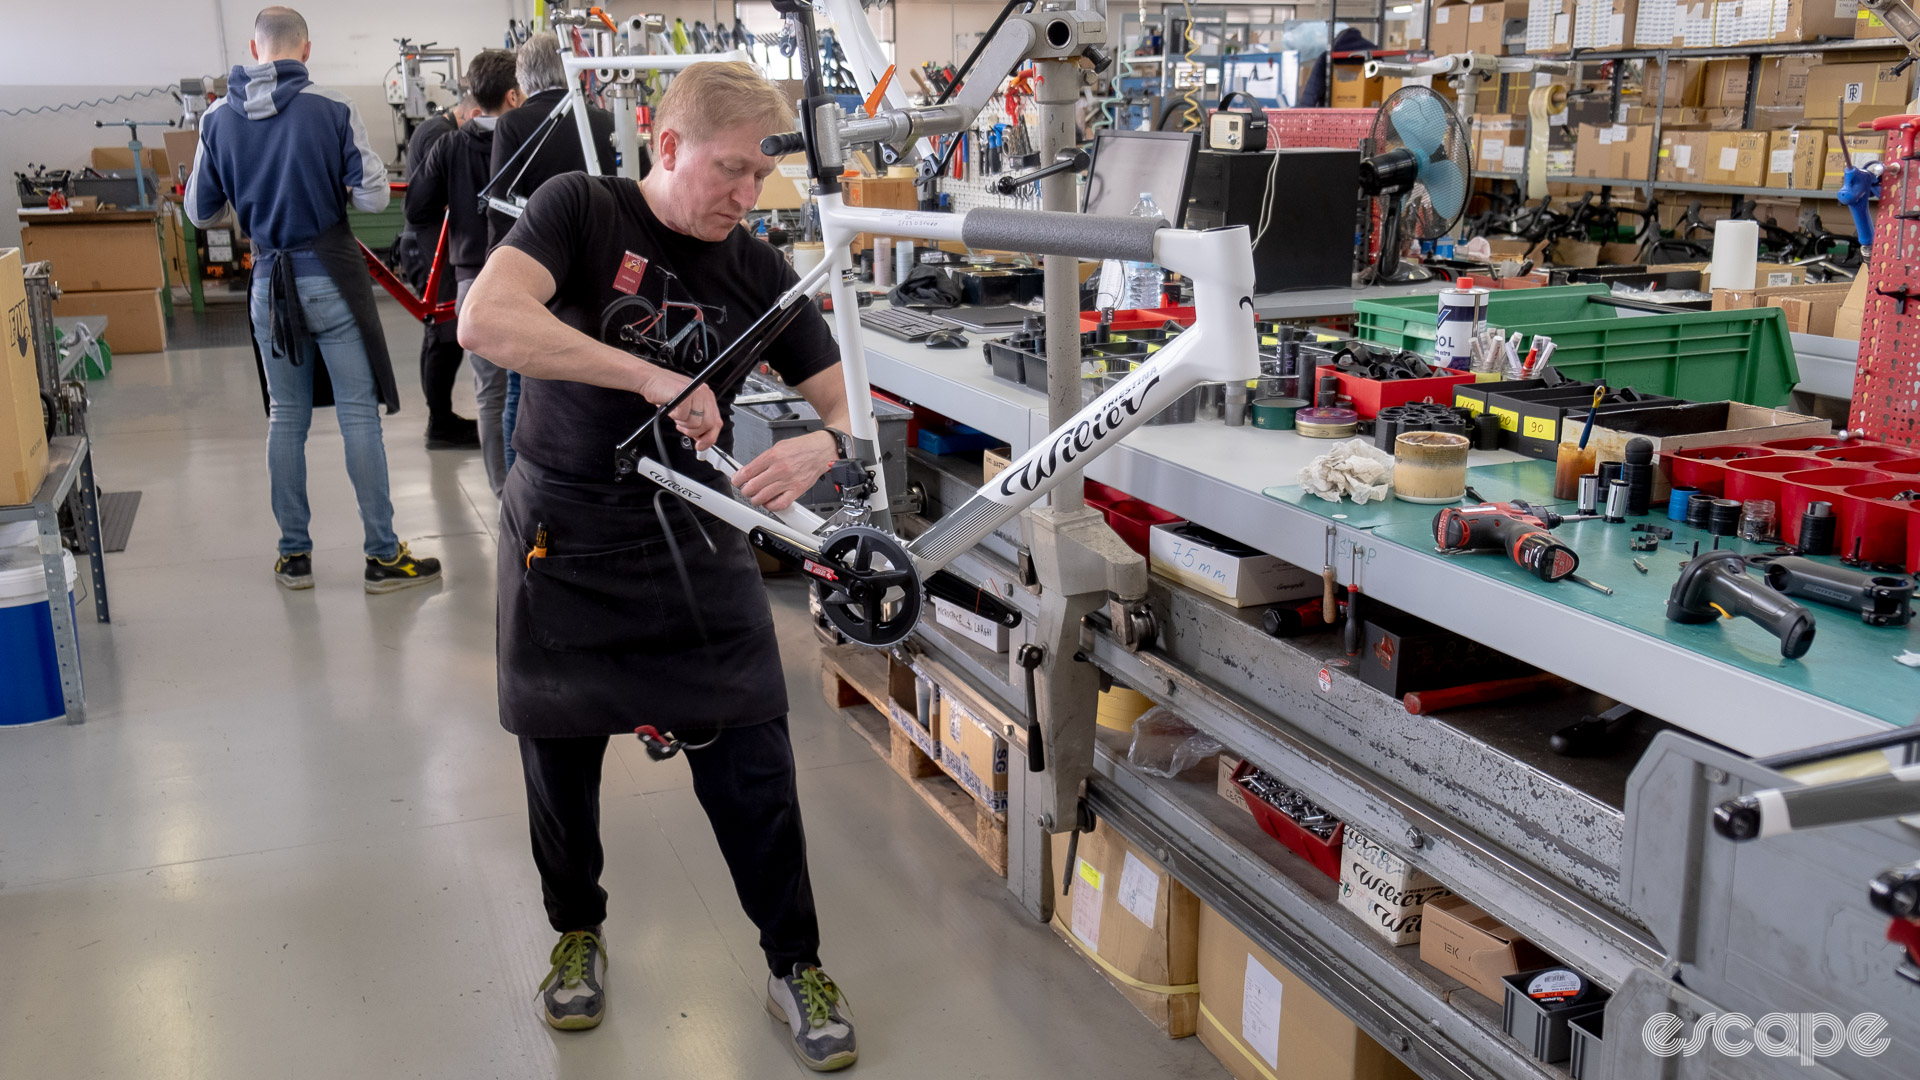 The photo shows a mechanic routing a rear brake hose through a frame on Wilier's assembly line.